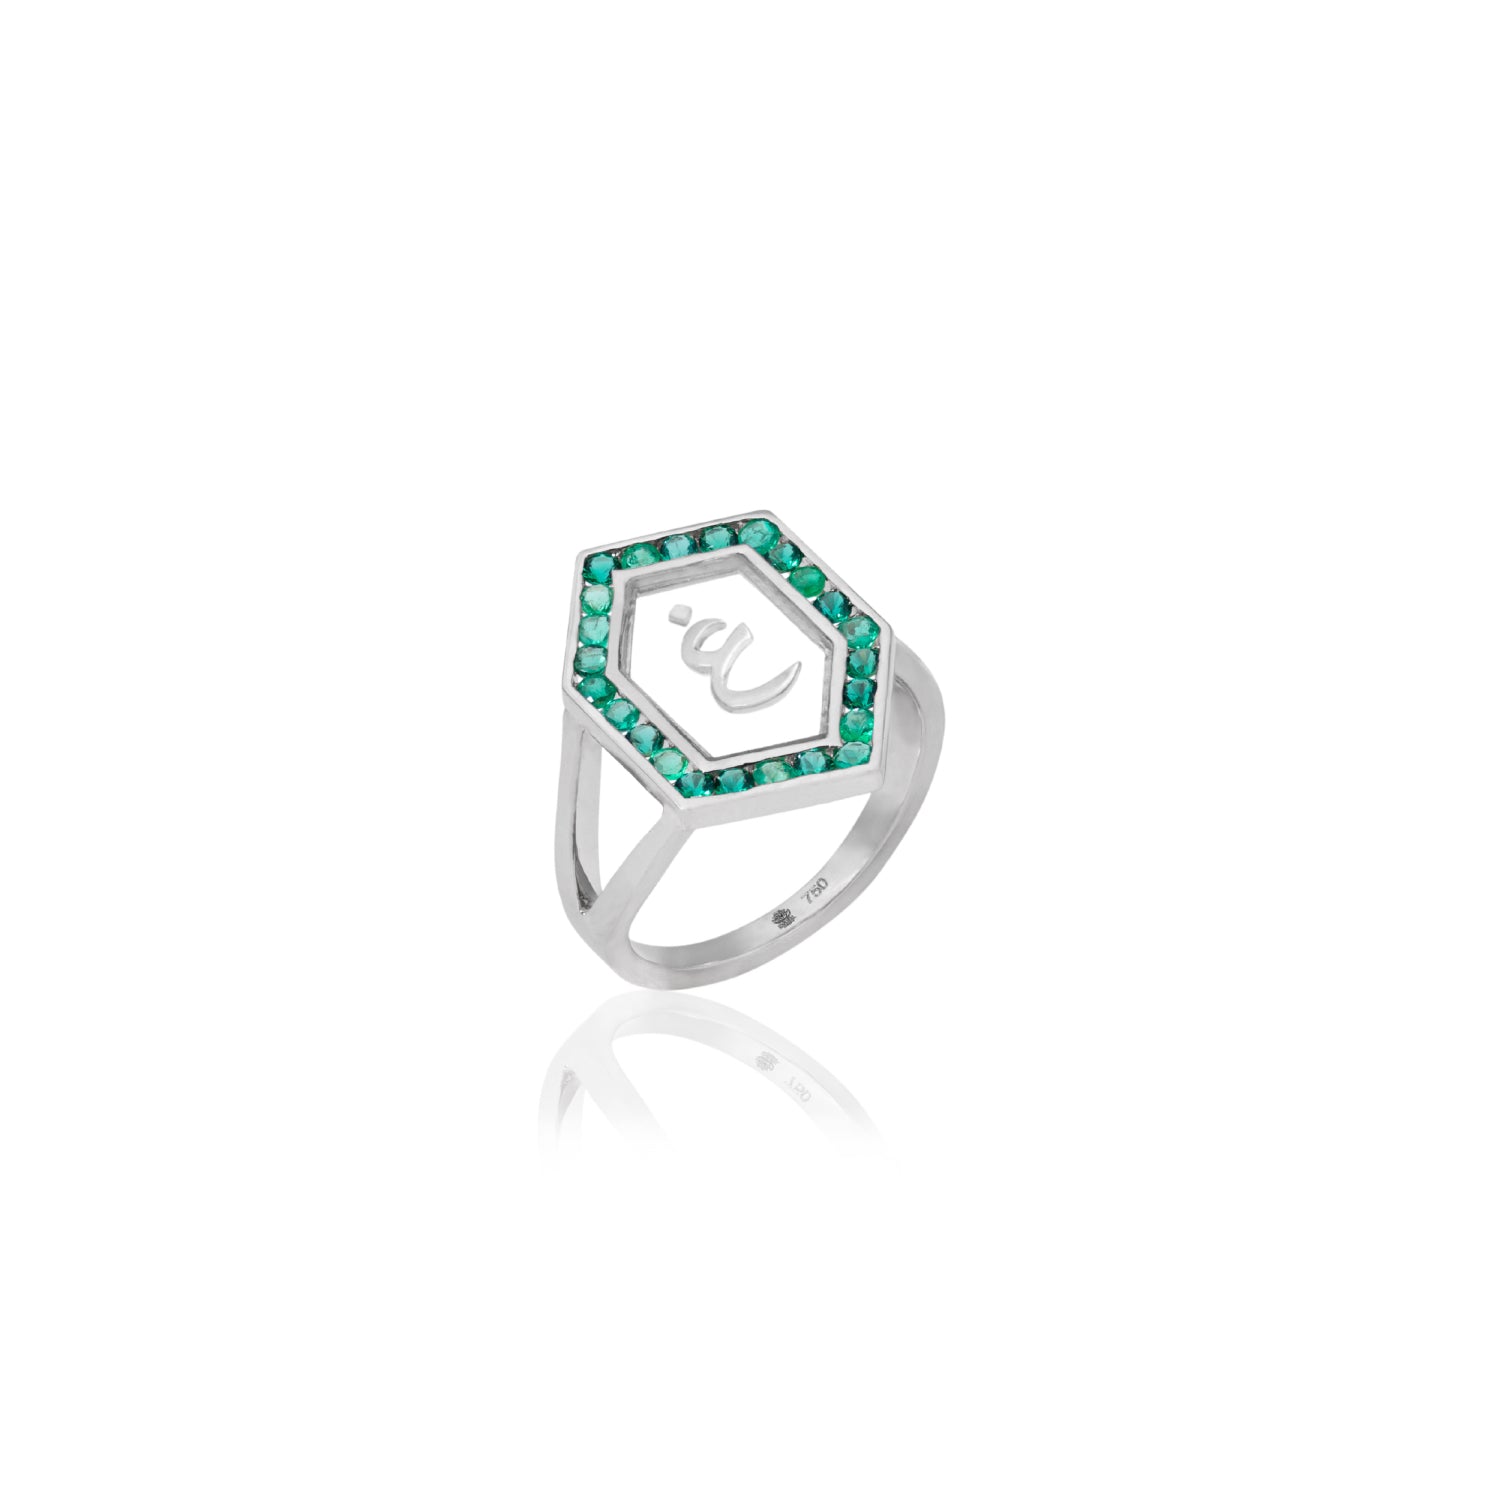 Qamoos 1.0 Letter غ Emerald Ring in White Gold